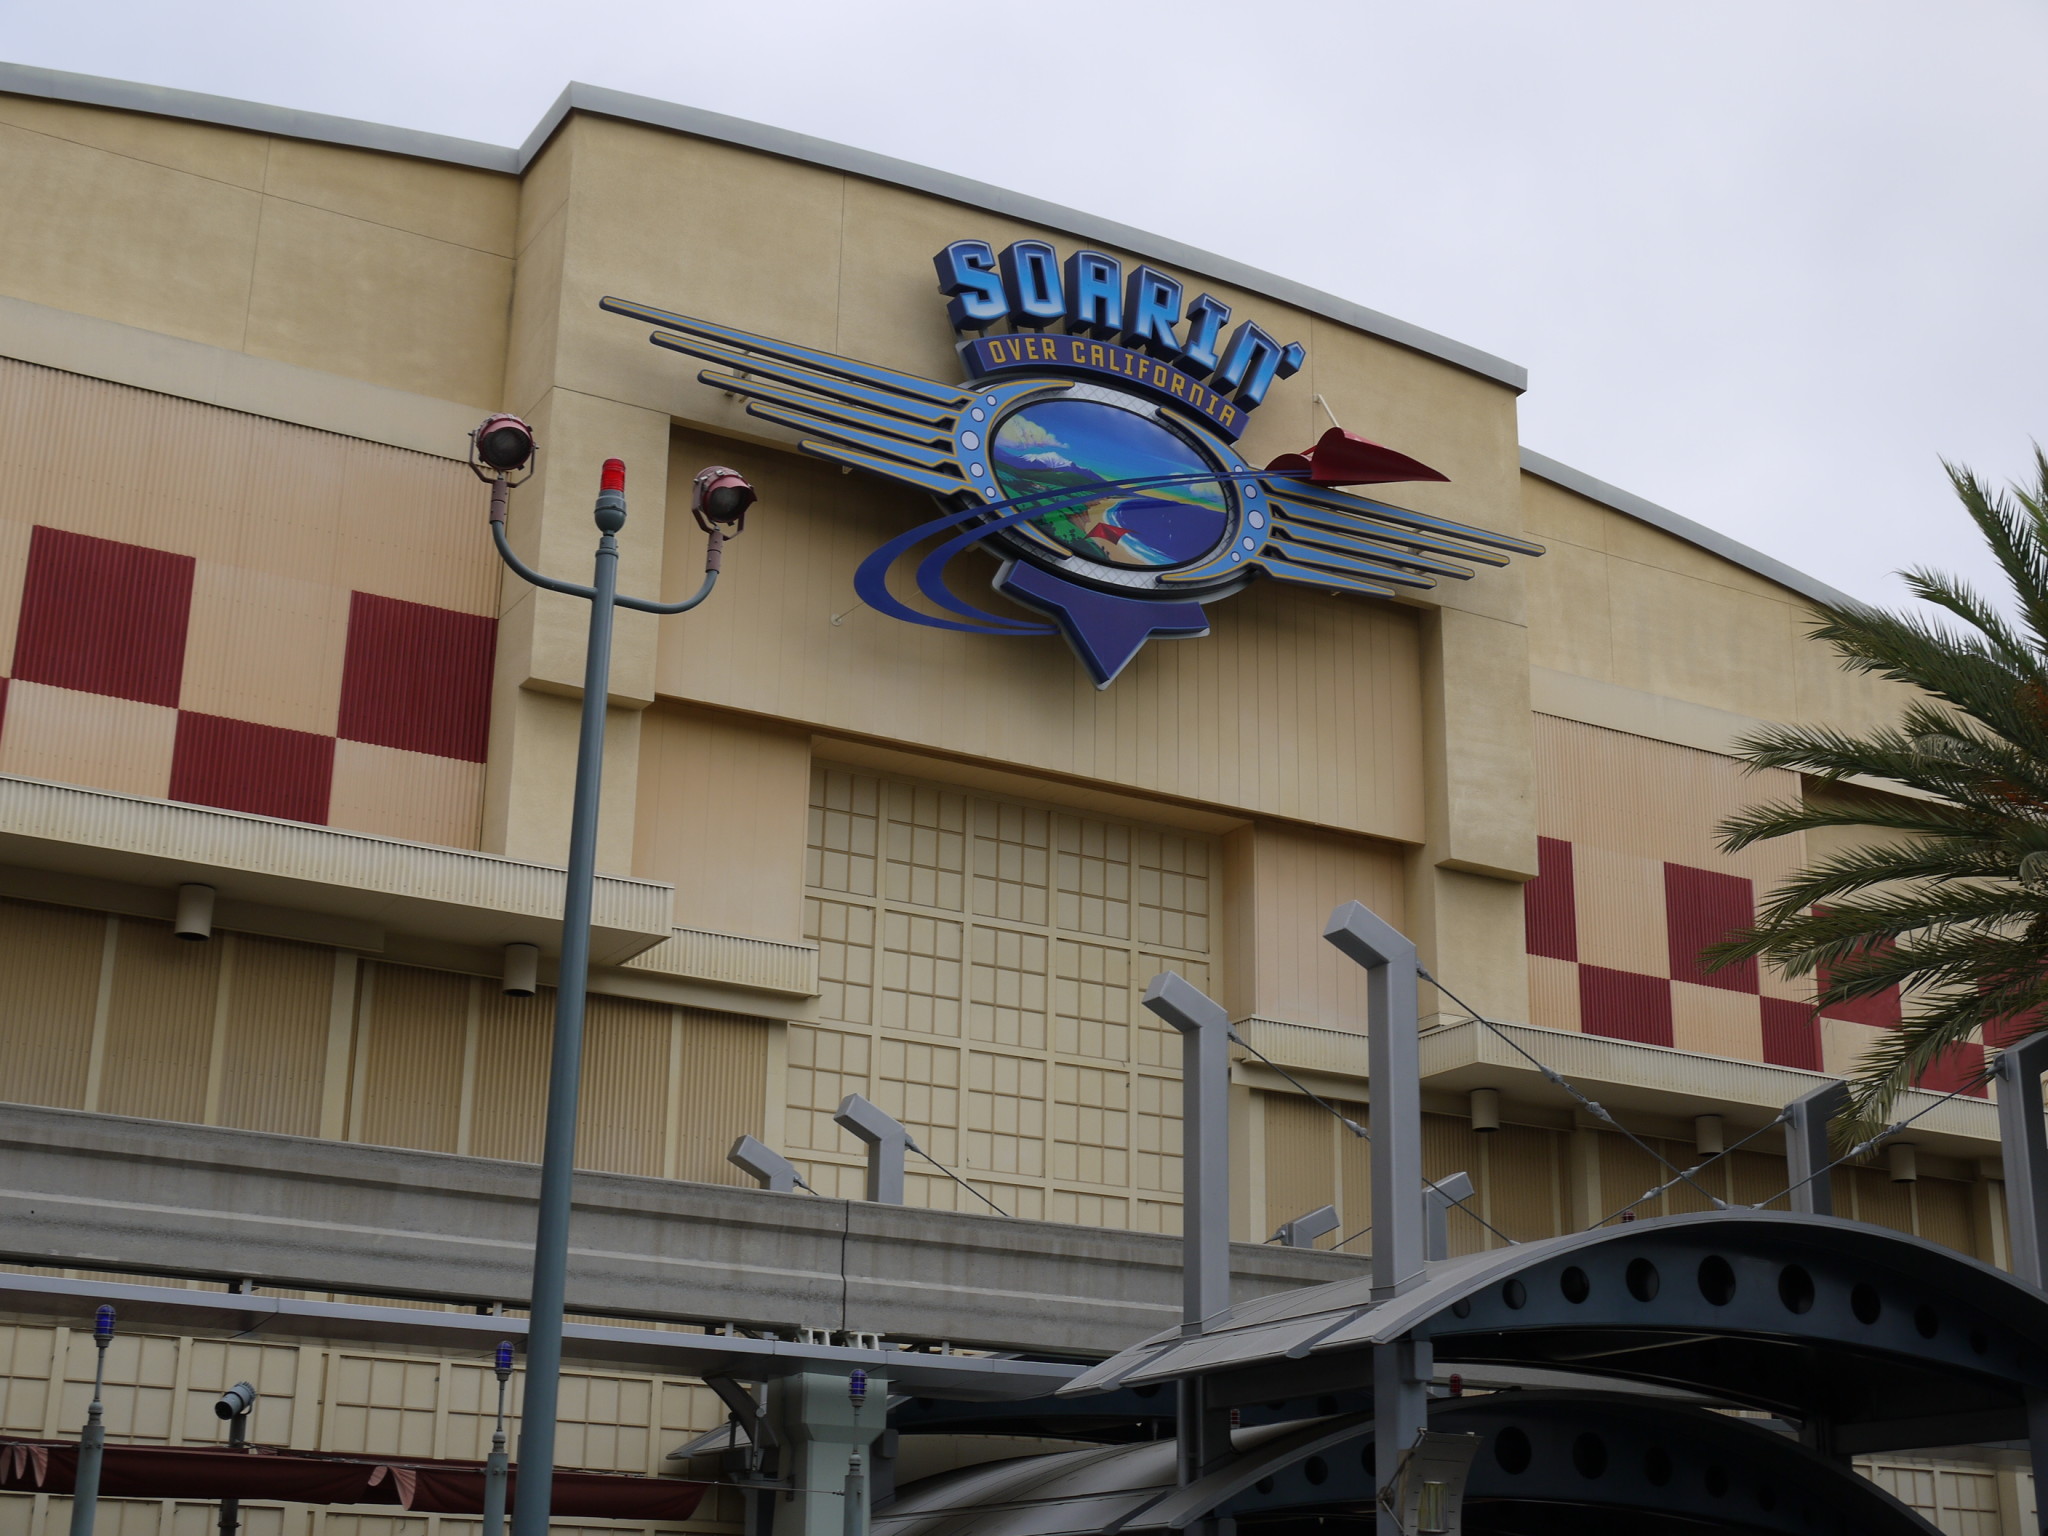 Soarin’ over California May Get a New Ending